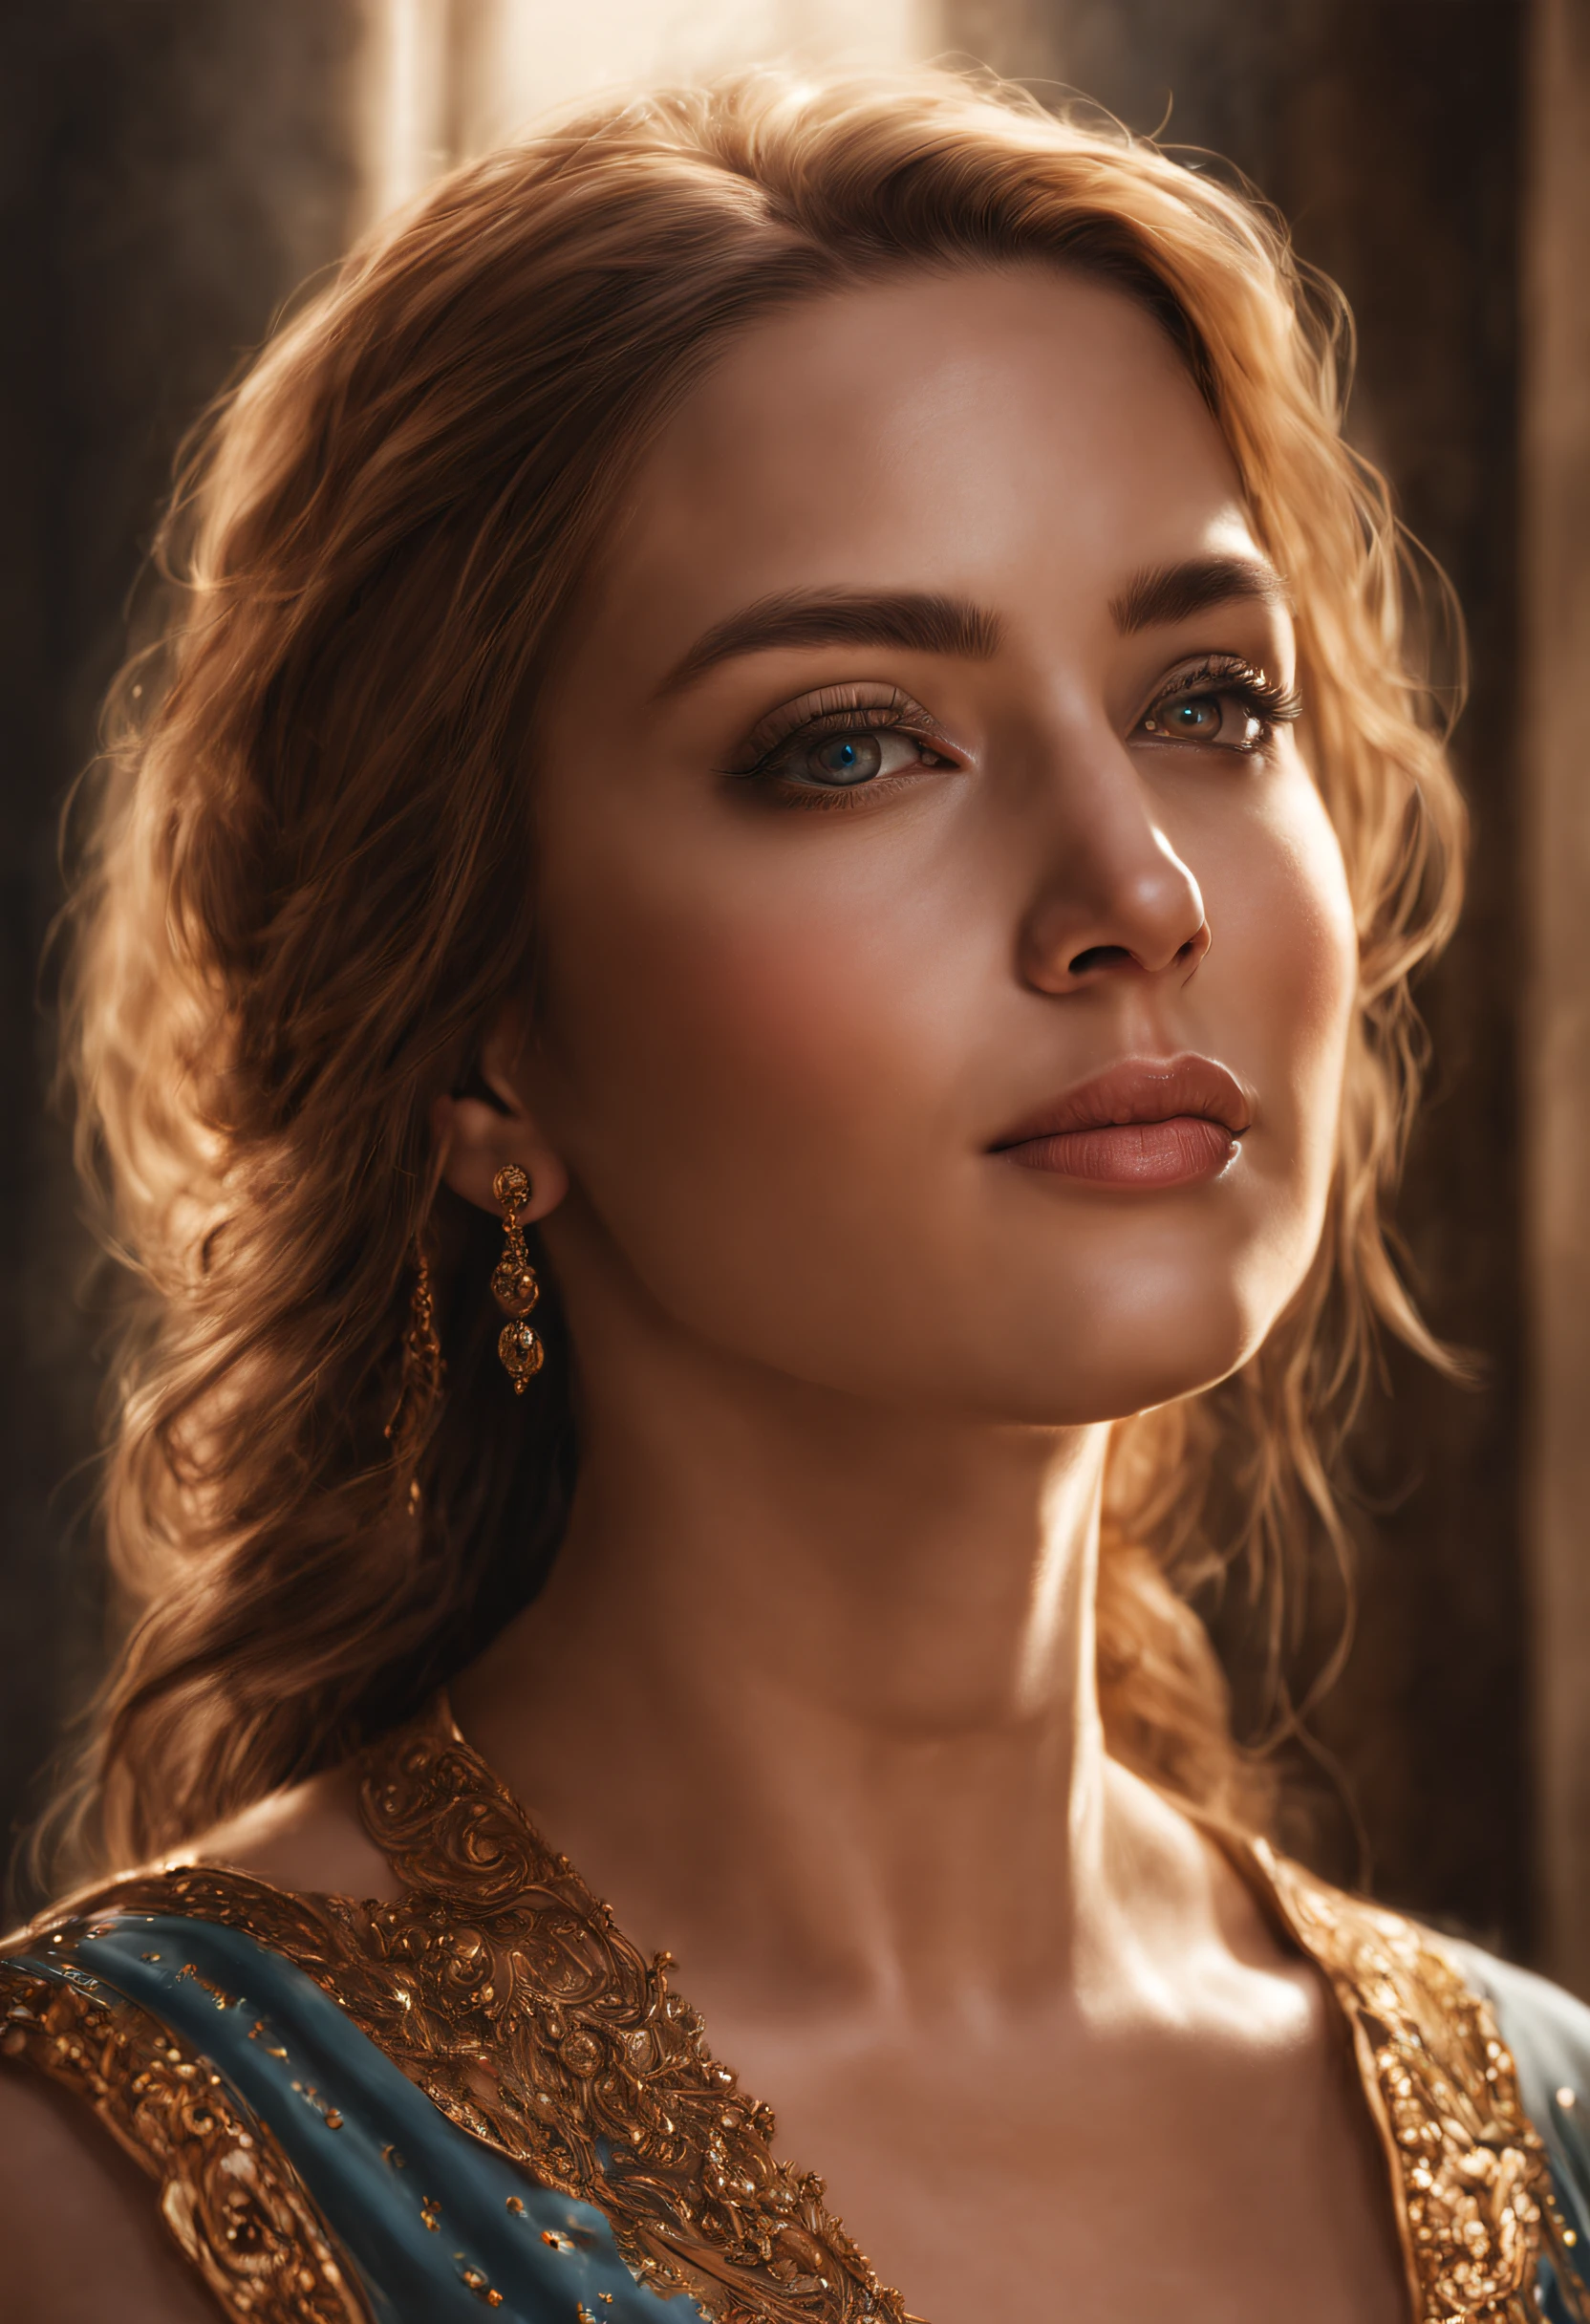 An incredible detailed gorgous women realistic portrait, beautifully showcased. Very detailed and with great light